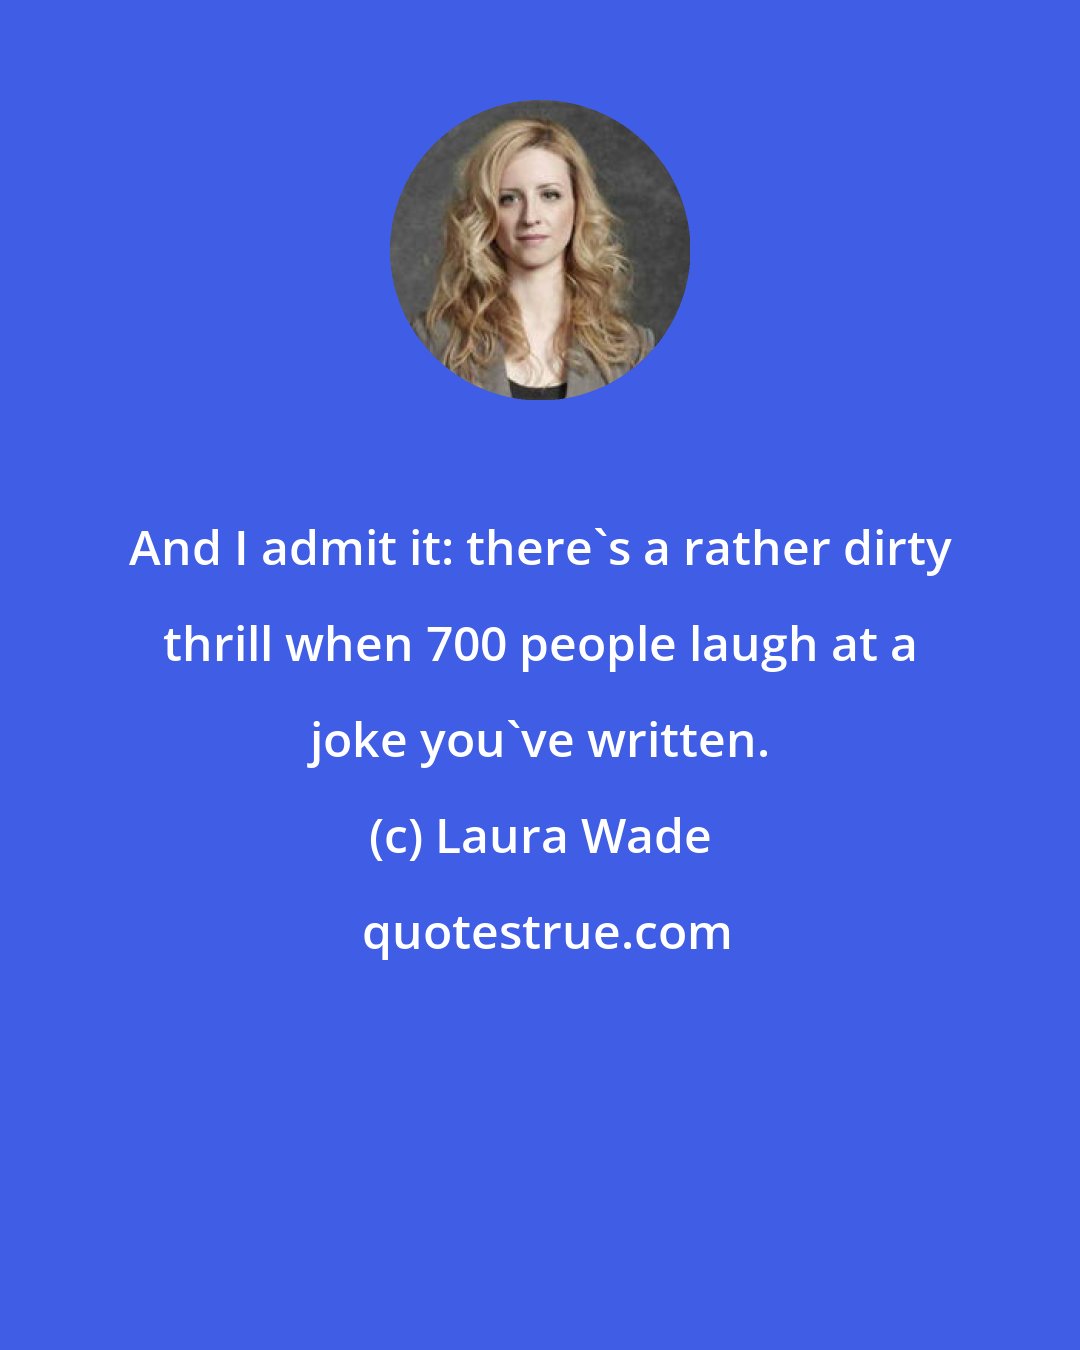 Laura Wade: And I admit it: there's a rather dirty thrill when 700 people laugh at a joke you've written.